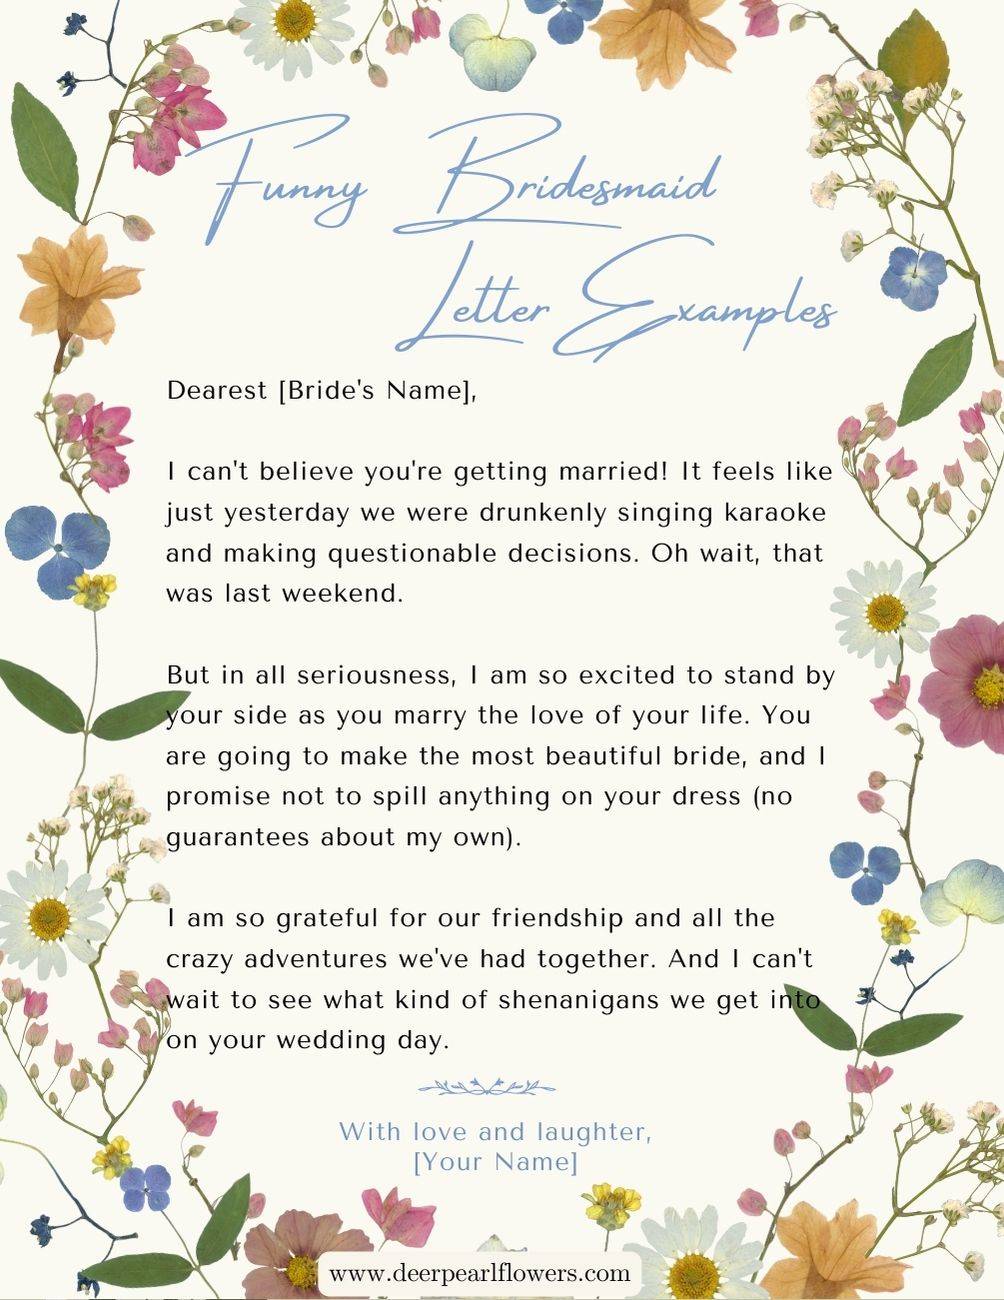 Funny Bridesmaid Letter Examples